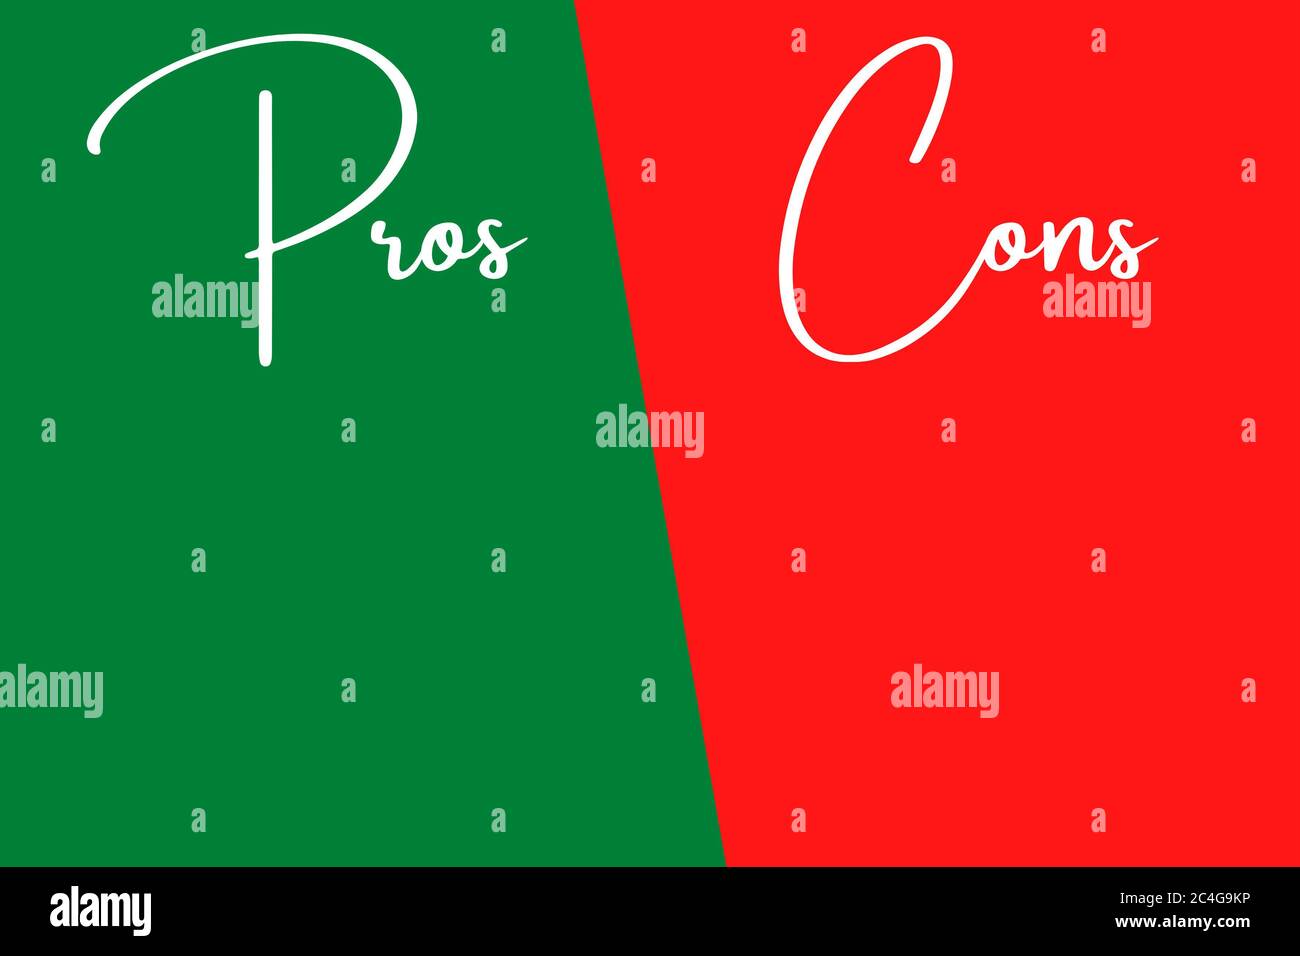 List Of Pros And Cons On A Green And Red Background Simple Concept For Comparison Between Advantages And Disadvantages In A Business Plan Or Comparis Stock Photo Alamy